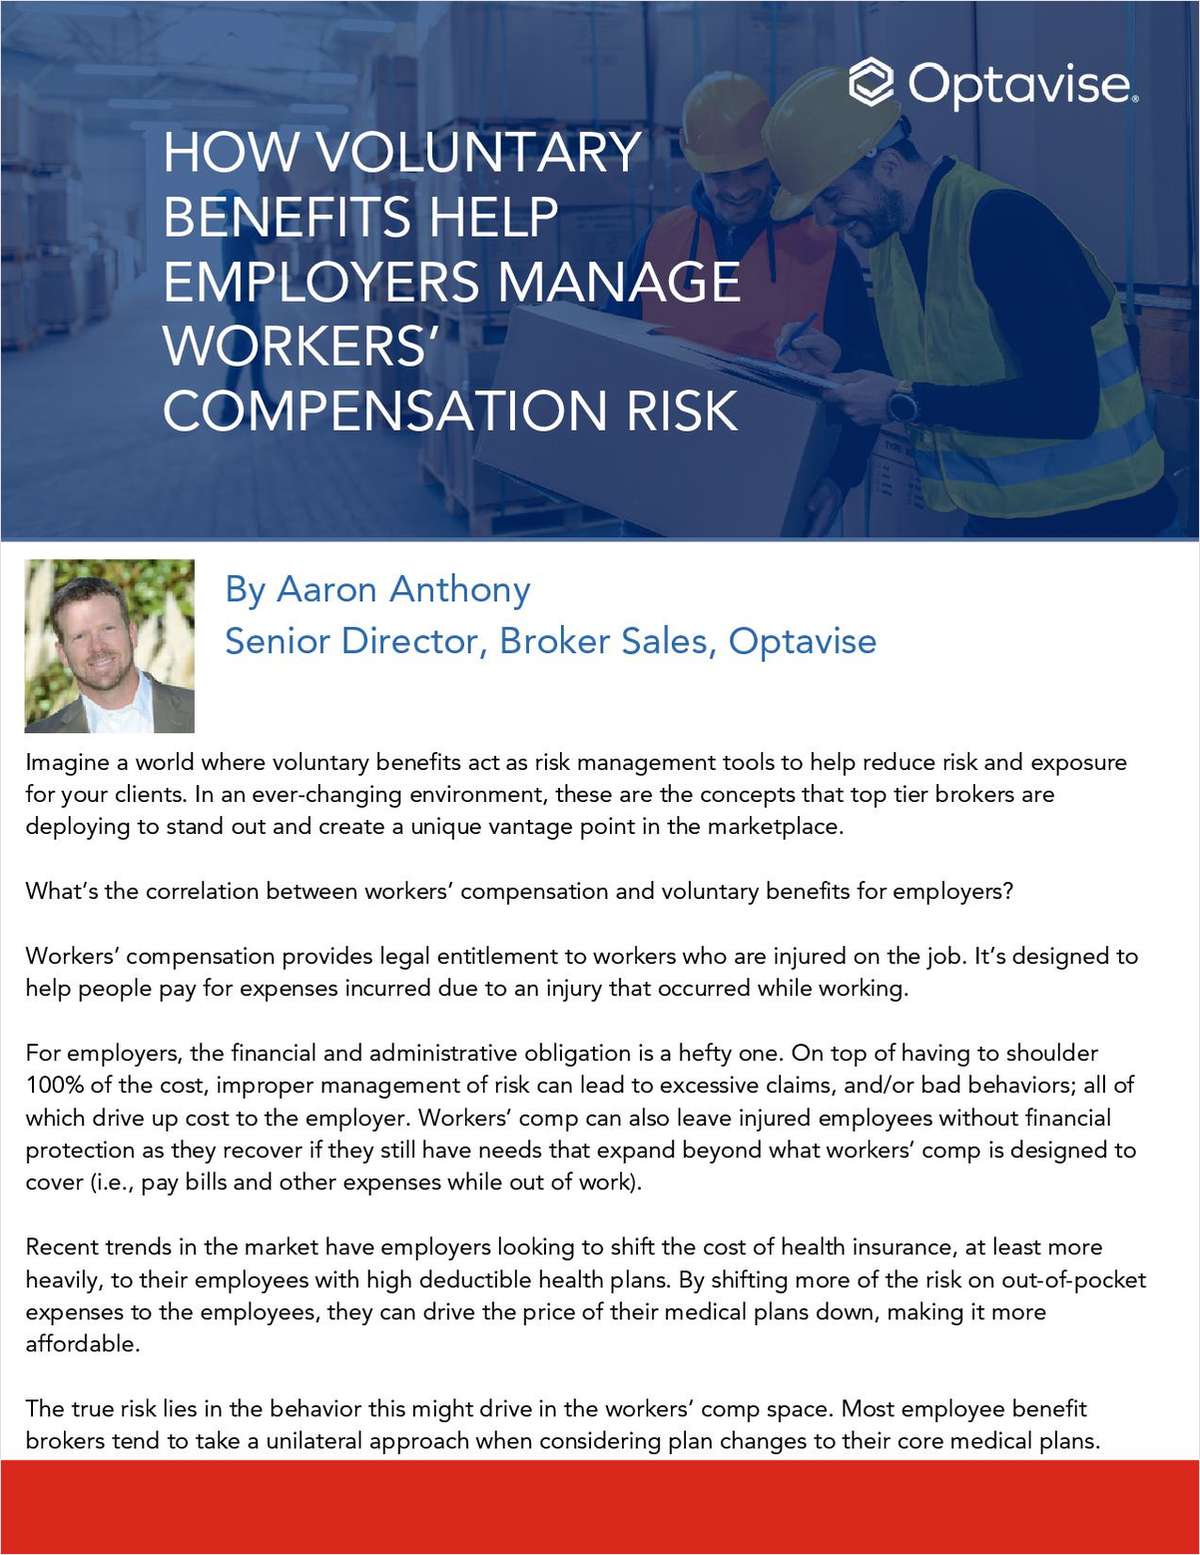 How Voluntary Benefits Help Manage Workers' Compensation Risk link